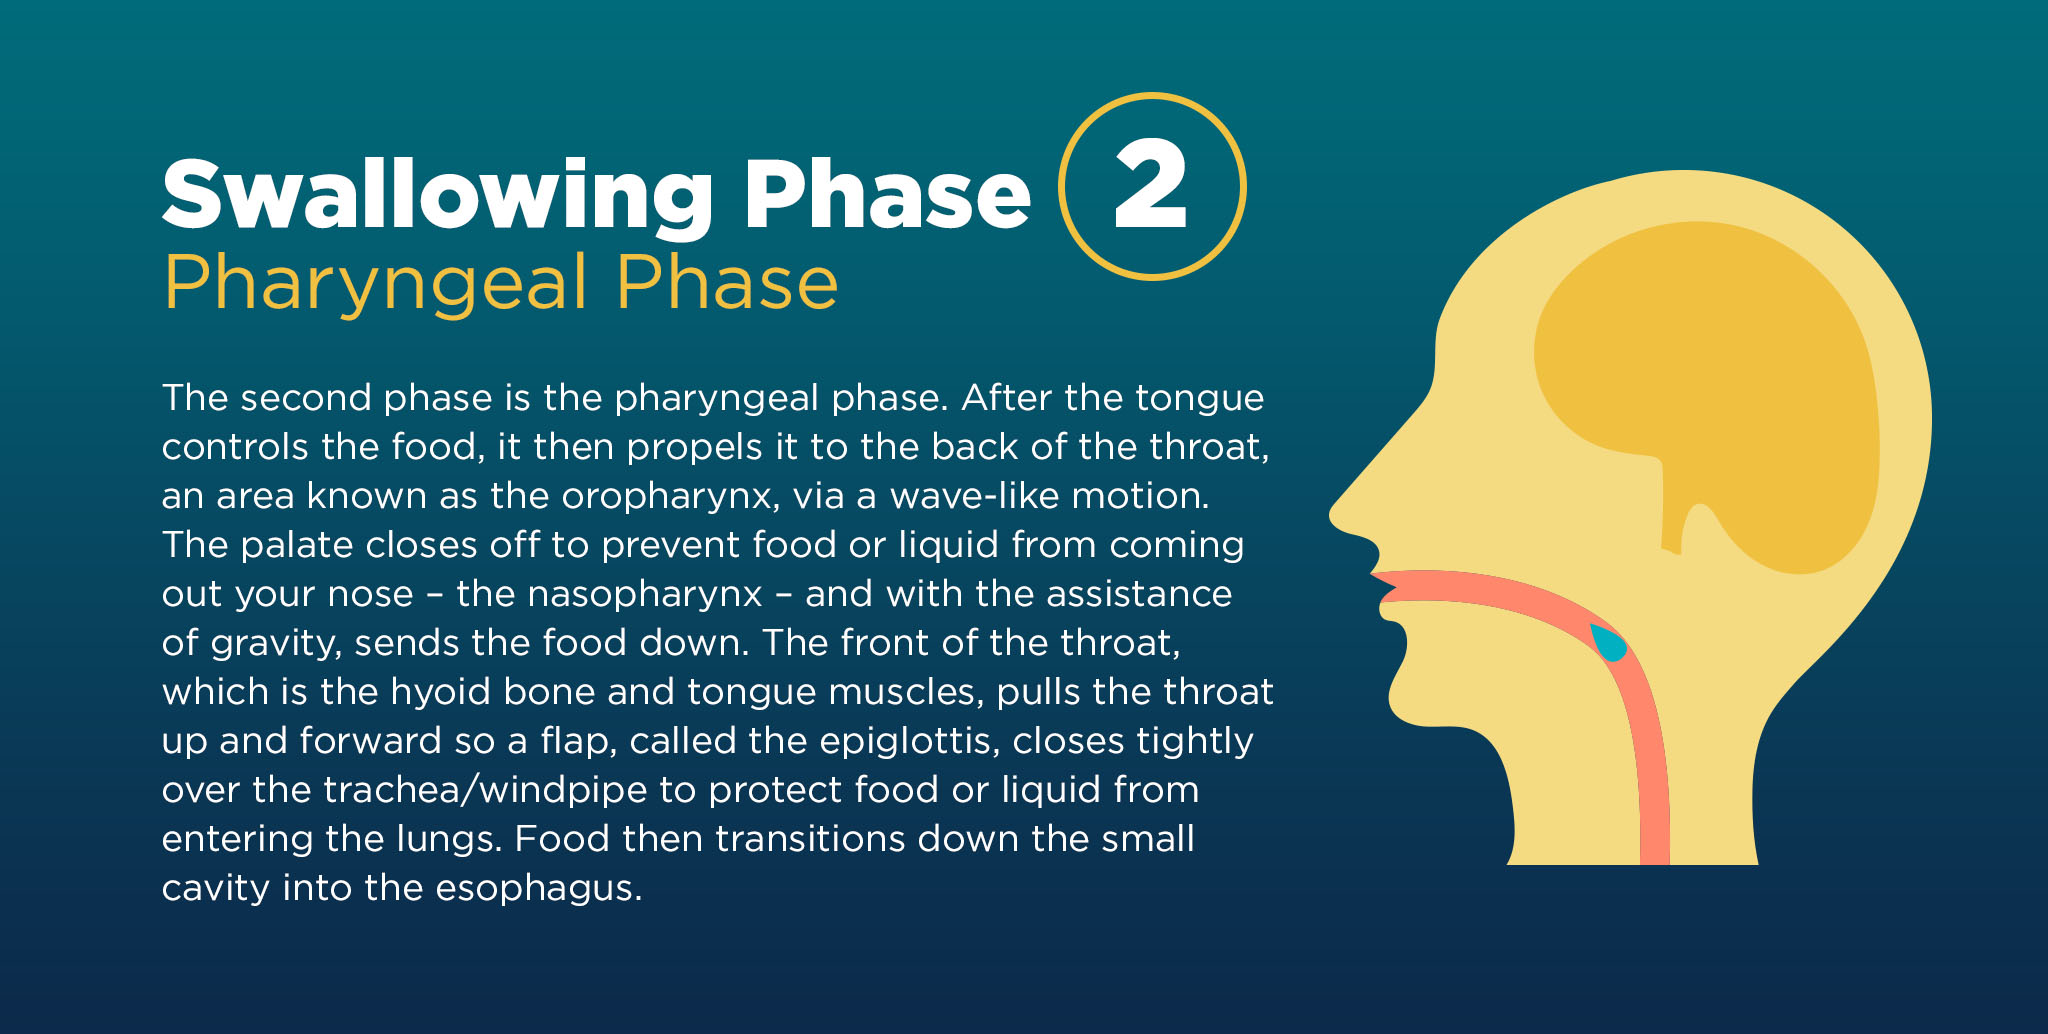 Explanation of the second phase of the swallowing process, known as the pharyngeal phase. 